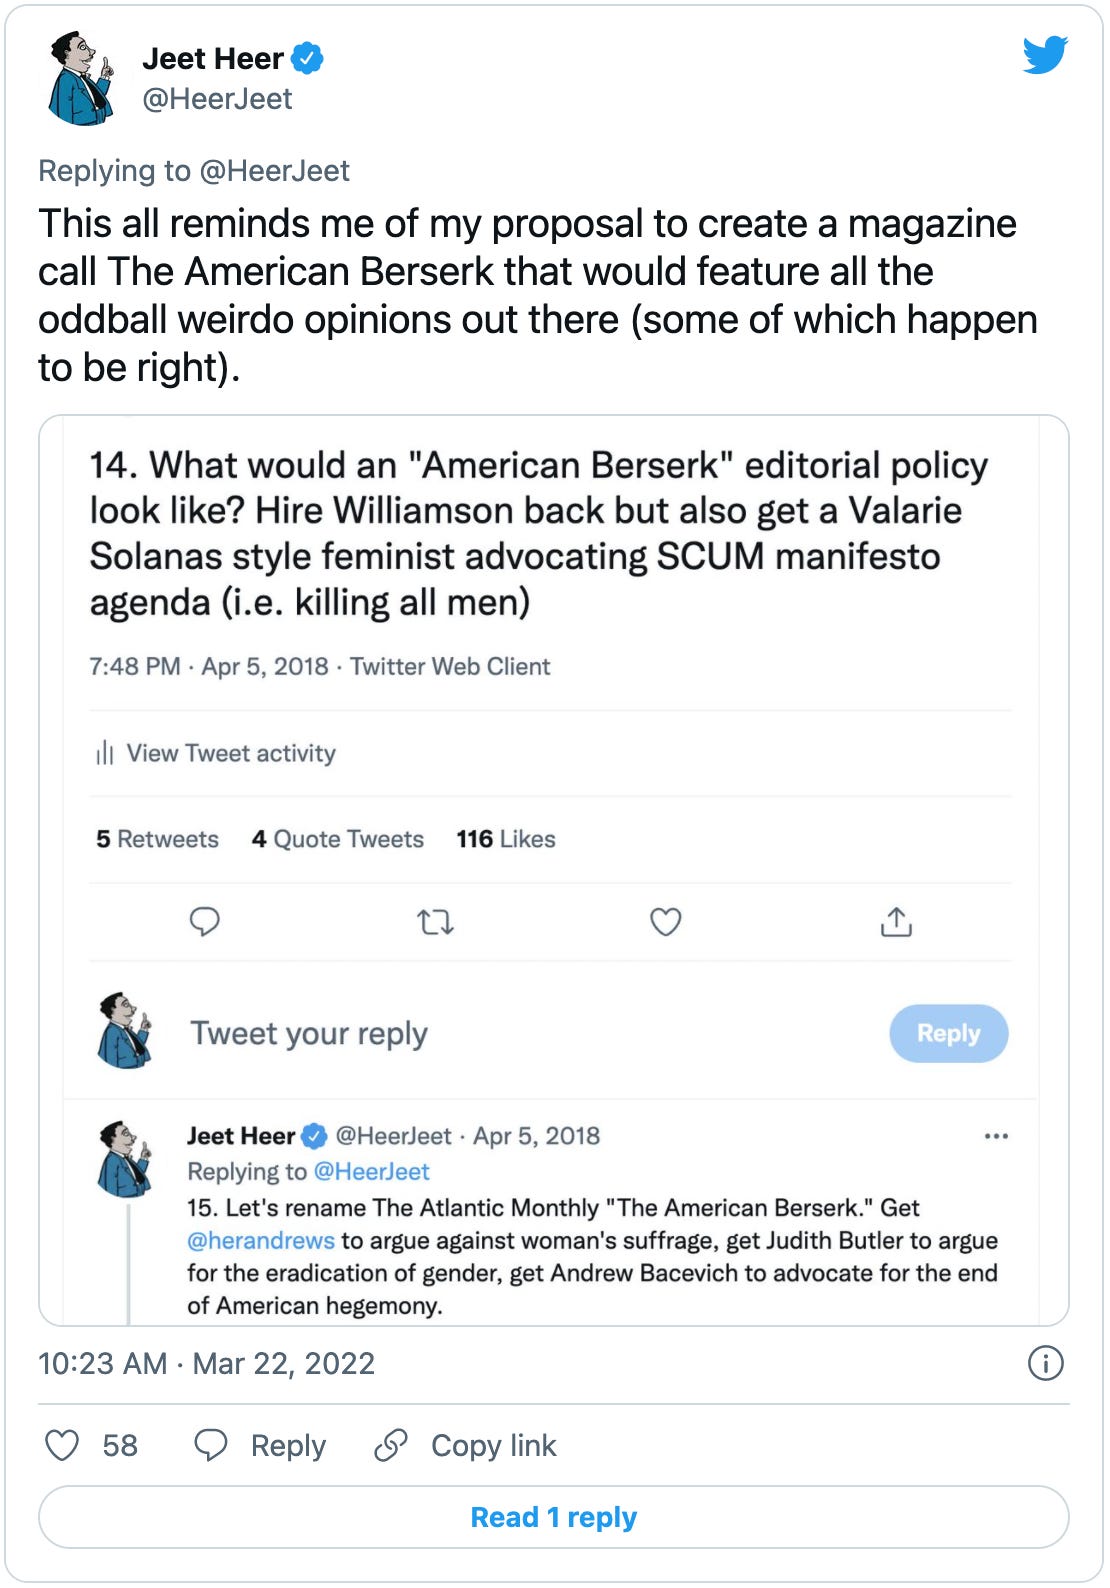 Tweet by Jeet Heer: “This all reminds me of my proposal to create a magazine call The American Berserk that would feature all the oddball weirdo opinions out there (some of which happen to be right).”